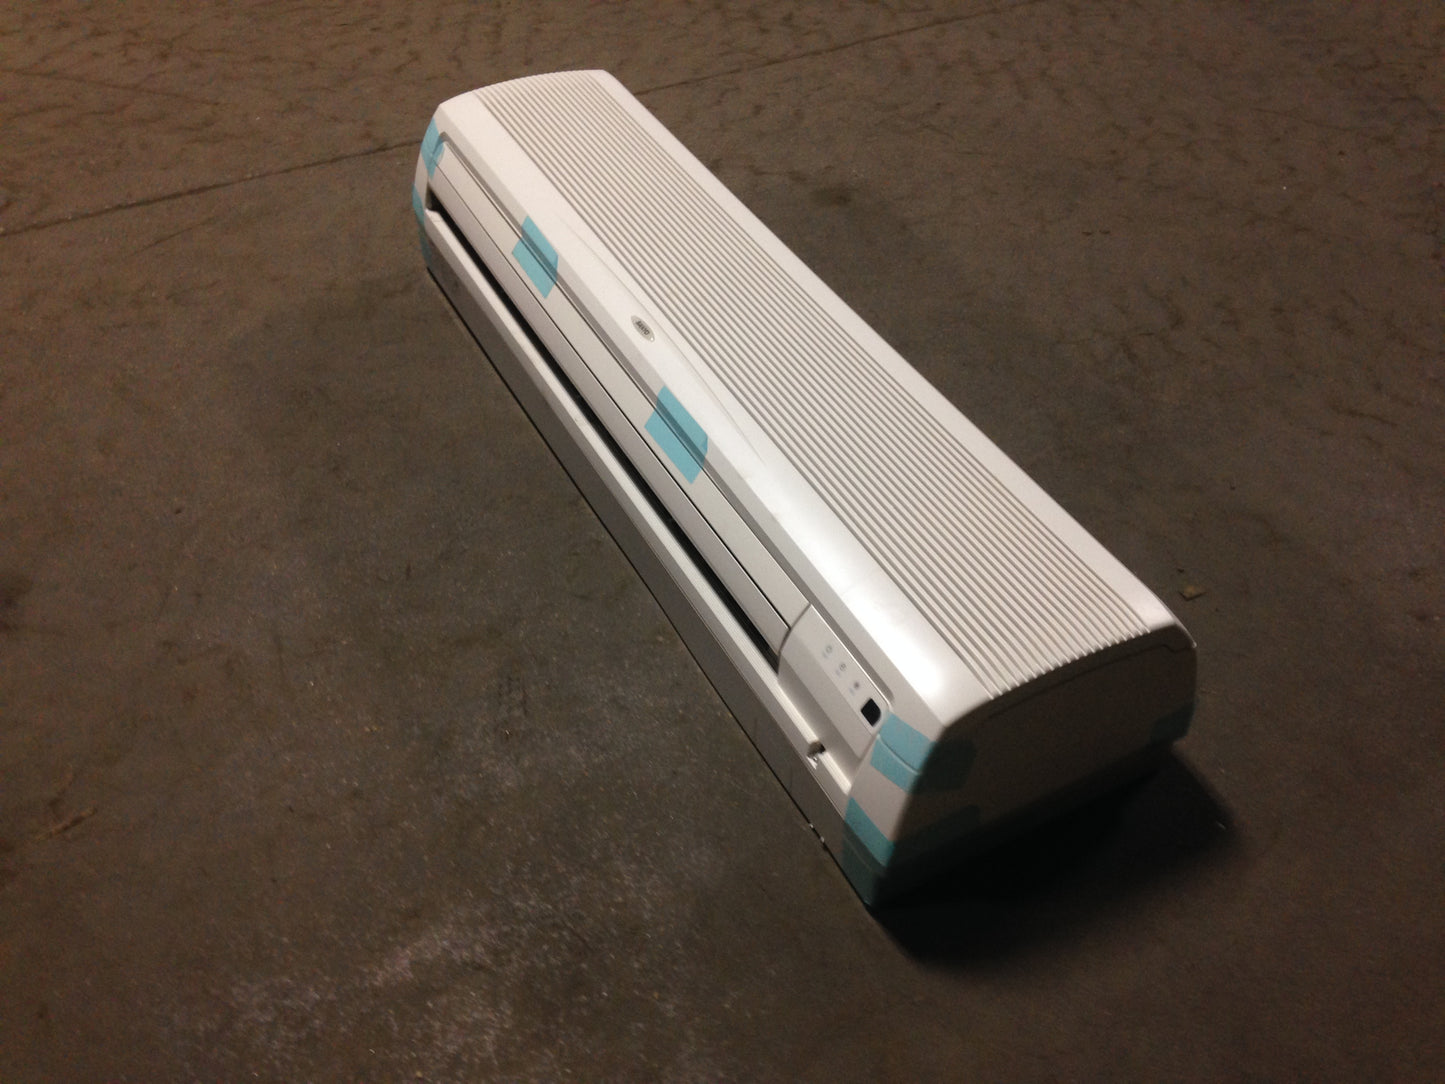 25,200 BTU WALL MOUNTED DUCTLESS INDOOR MINI-SPLIT AIR CONDITIONER UNIT, 14.9 SEER 208-230/60/1 R-410A CFM 559